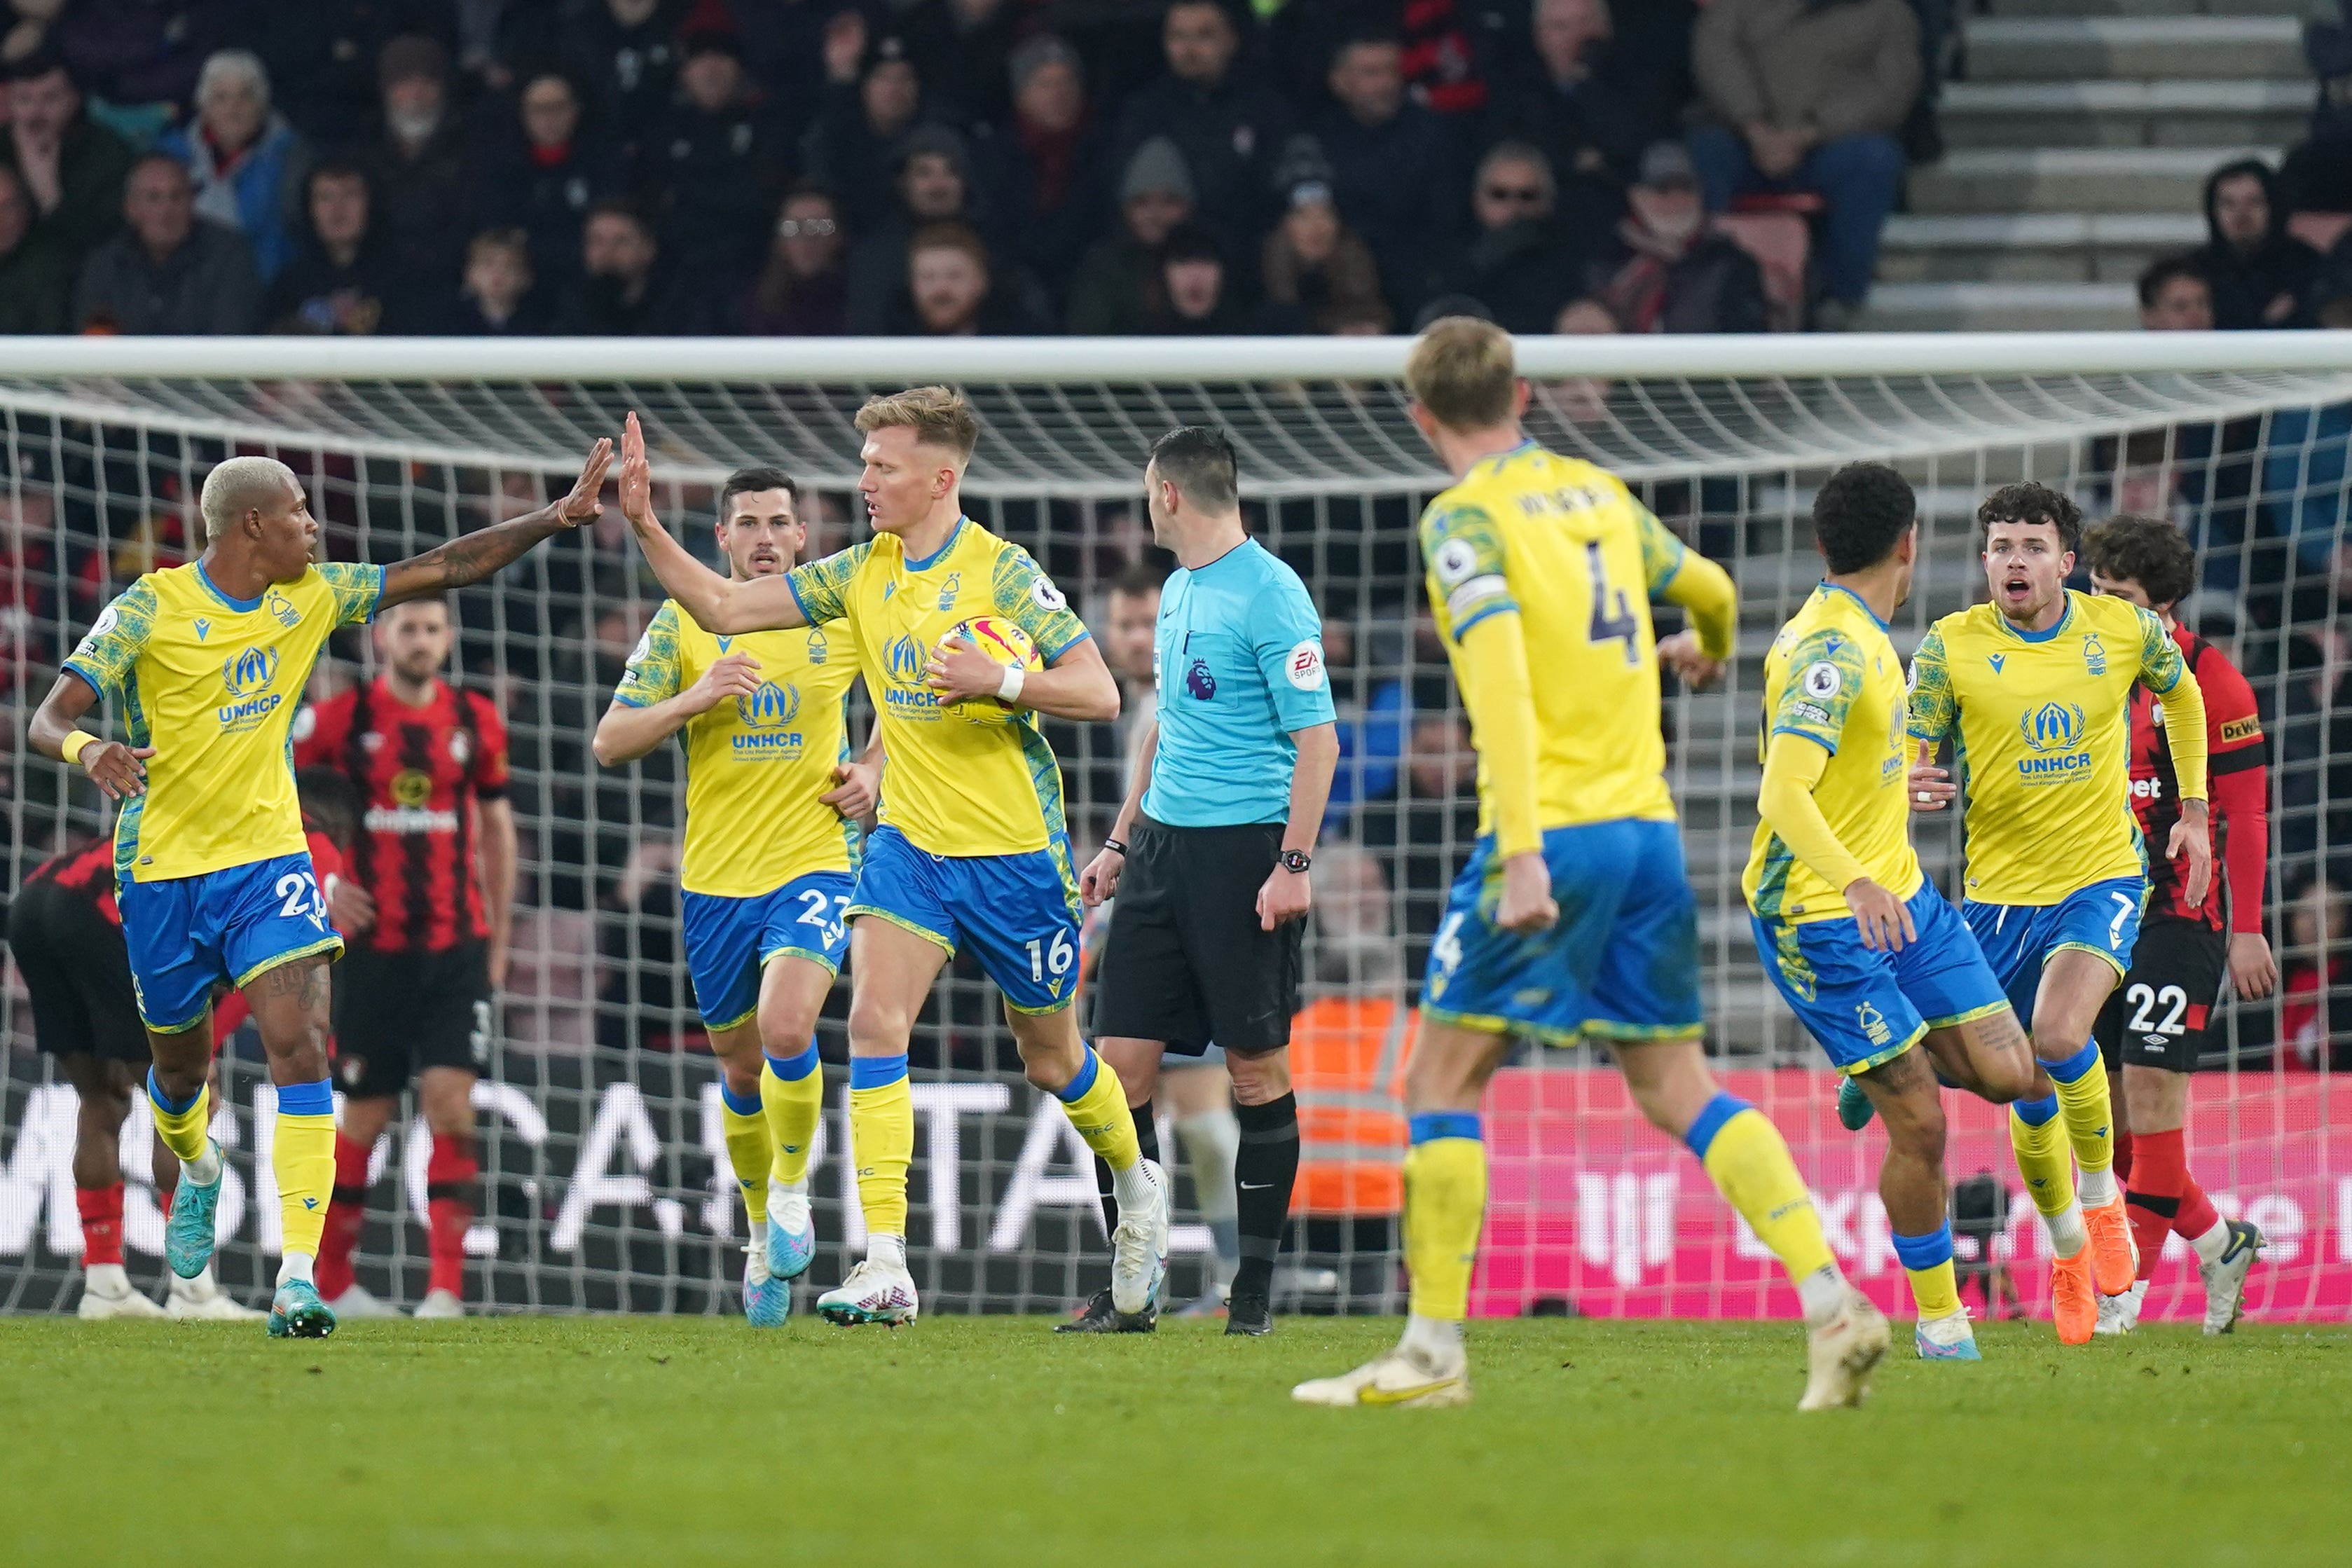 Surridge equalised at the death for Forest away to Bournemouth